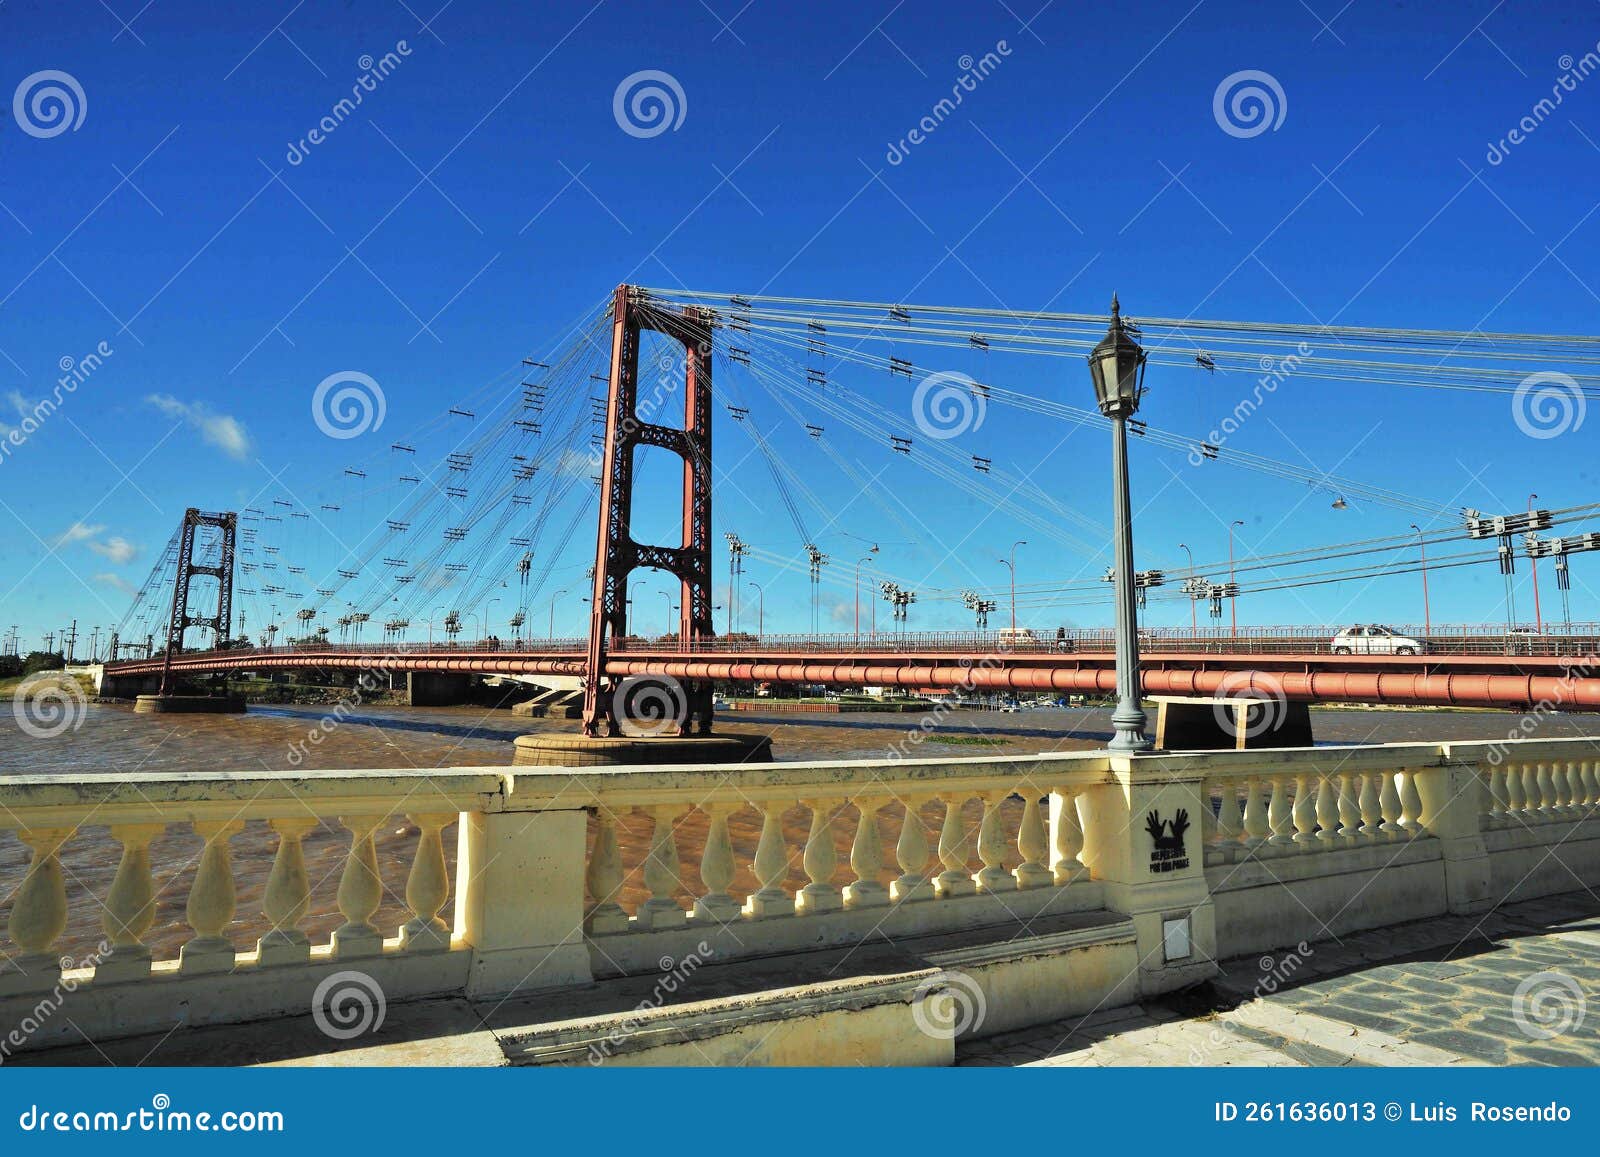 marcial candioti bridge, better known as the santa fe hanging bridge, is a suspension bridge located in the city of